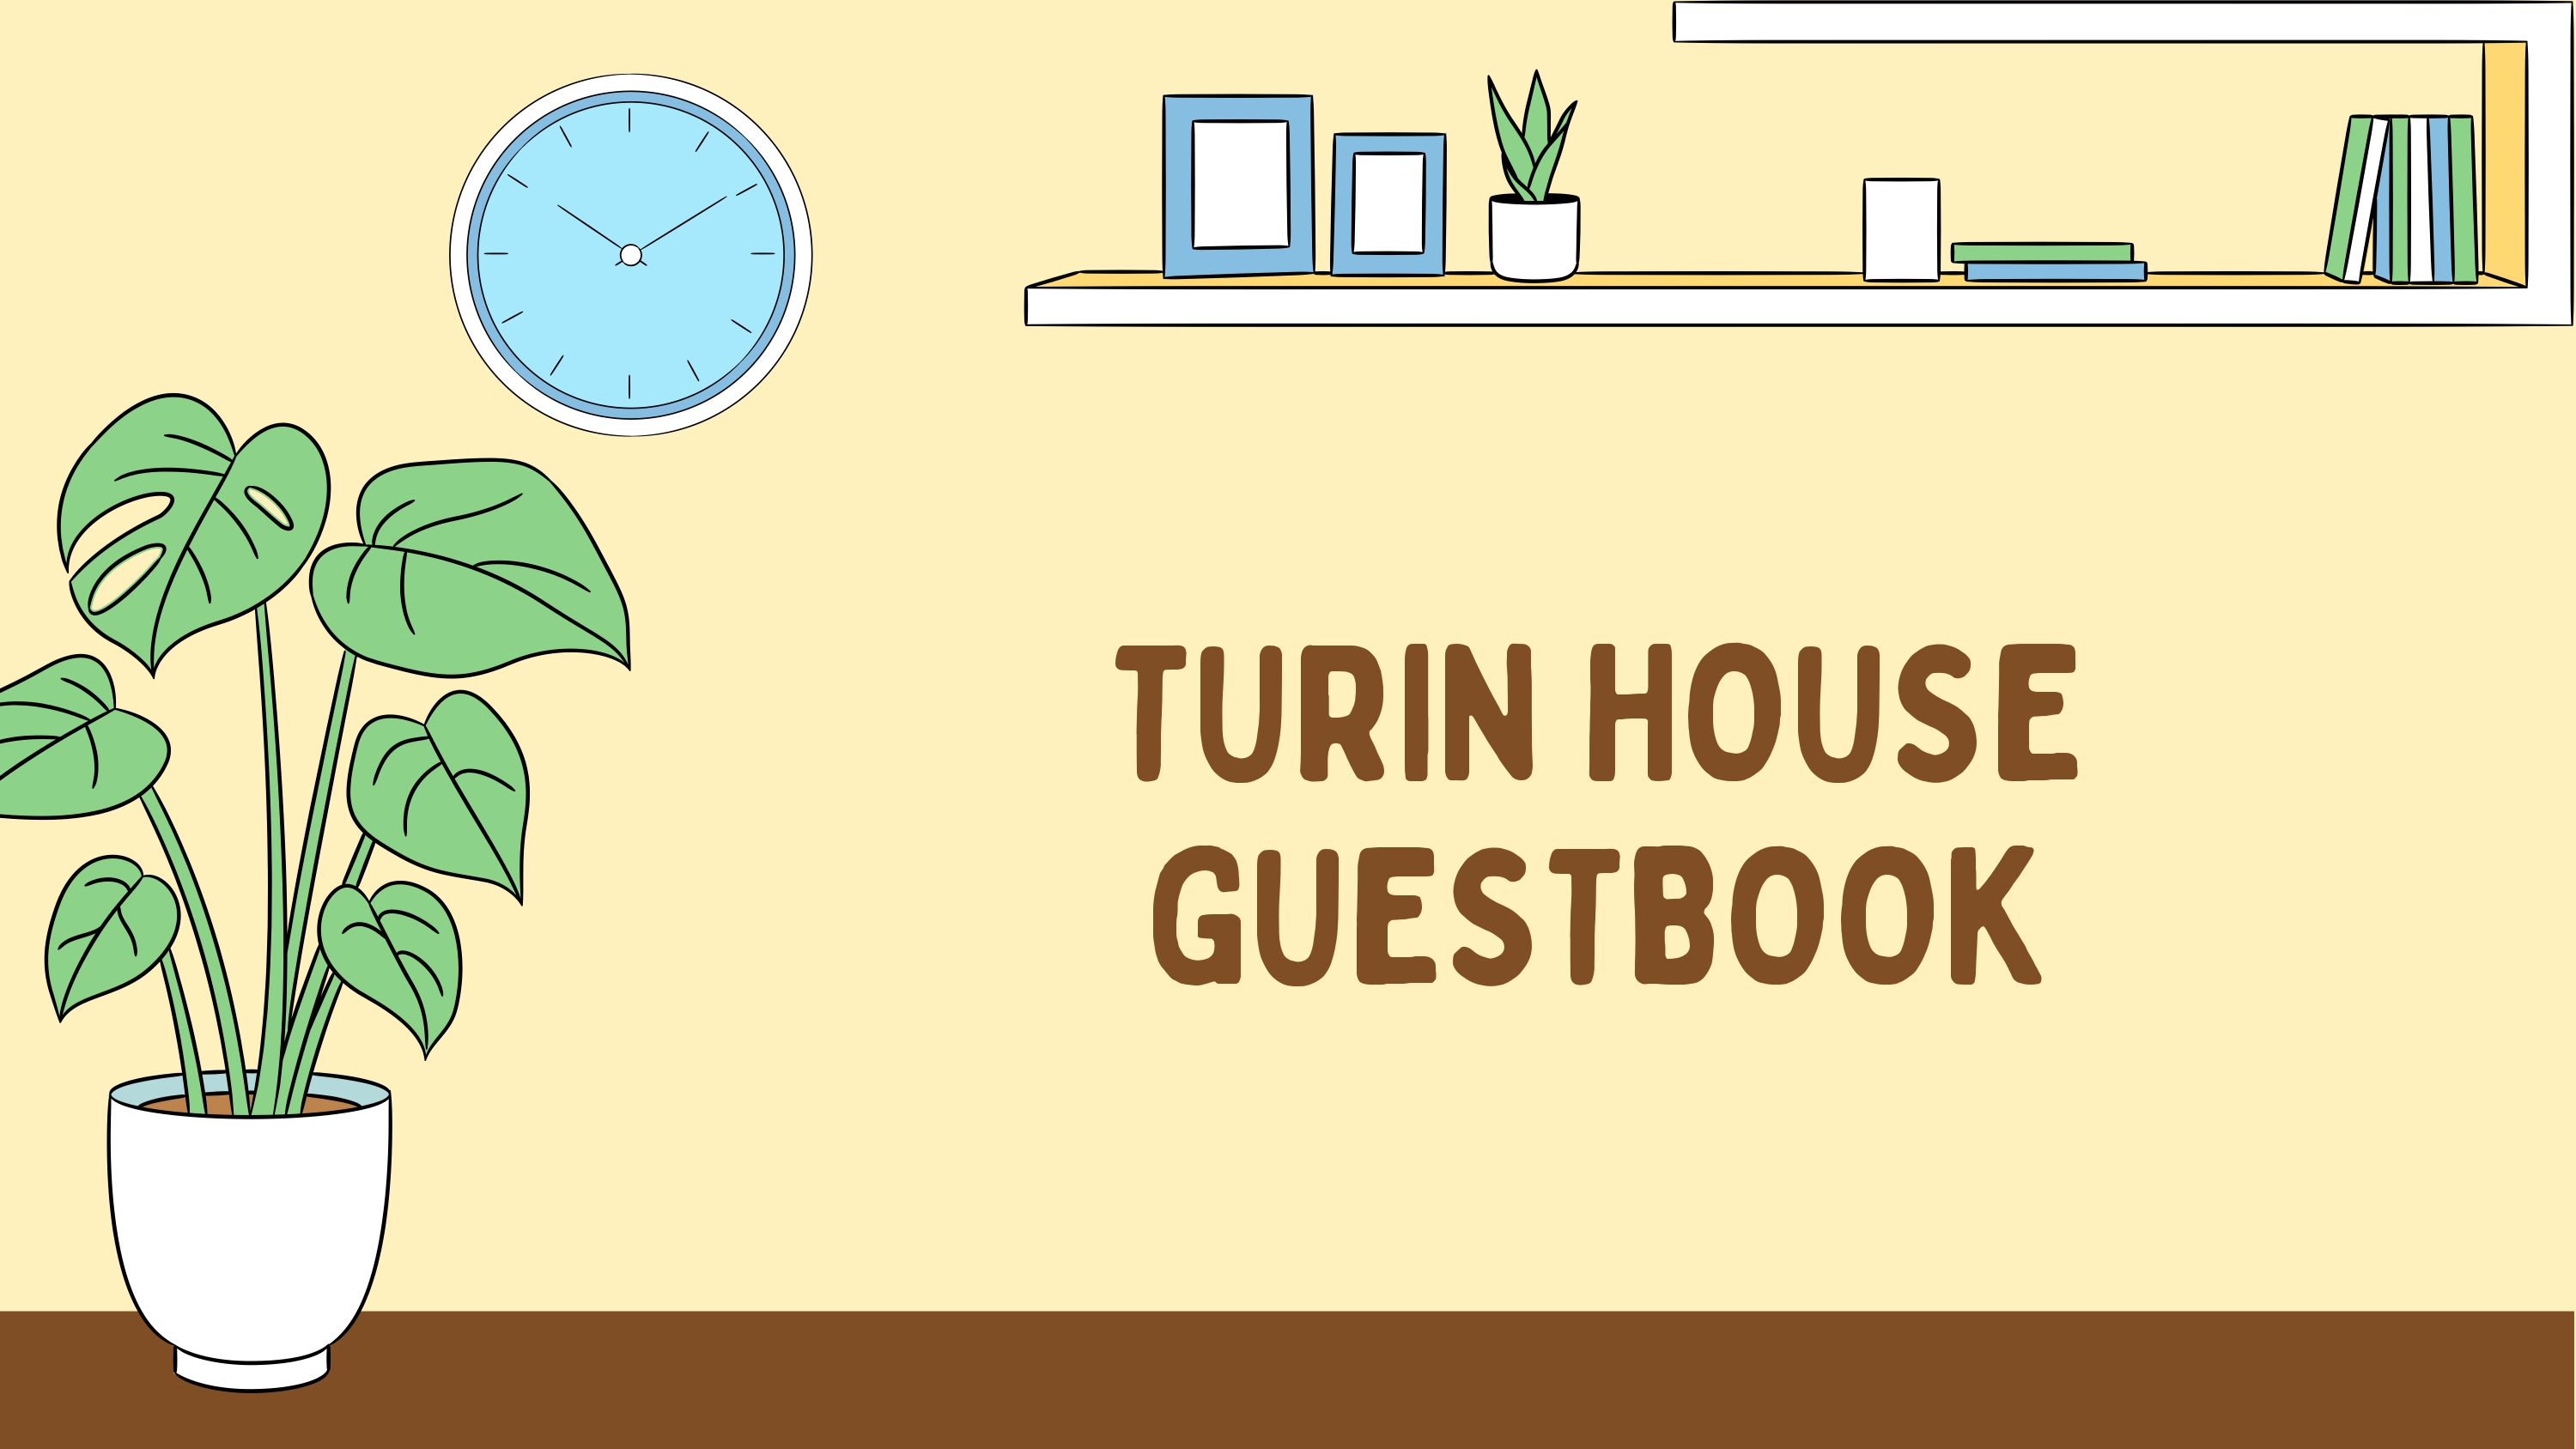 My house offline guestbook